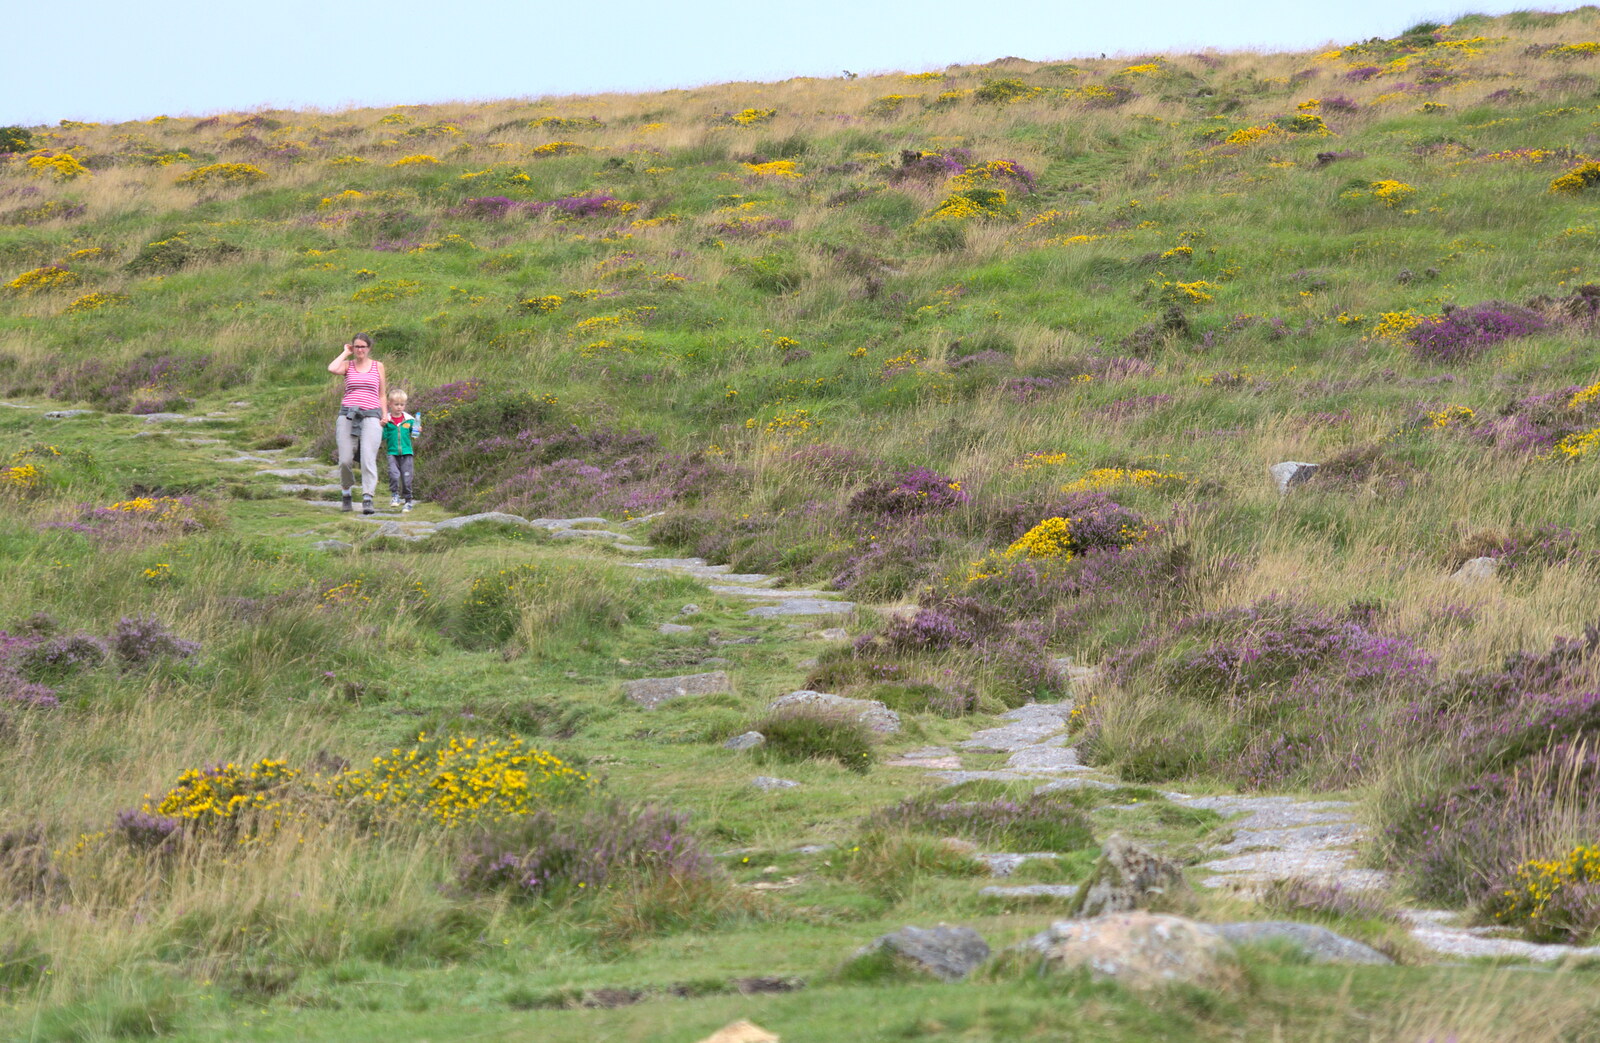 Isobel and Harry walk back down from Badger's Holt and Bronze-Age Grimspound, Dartmoor, Devon - 10th August 2016